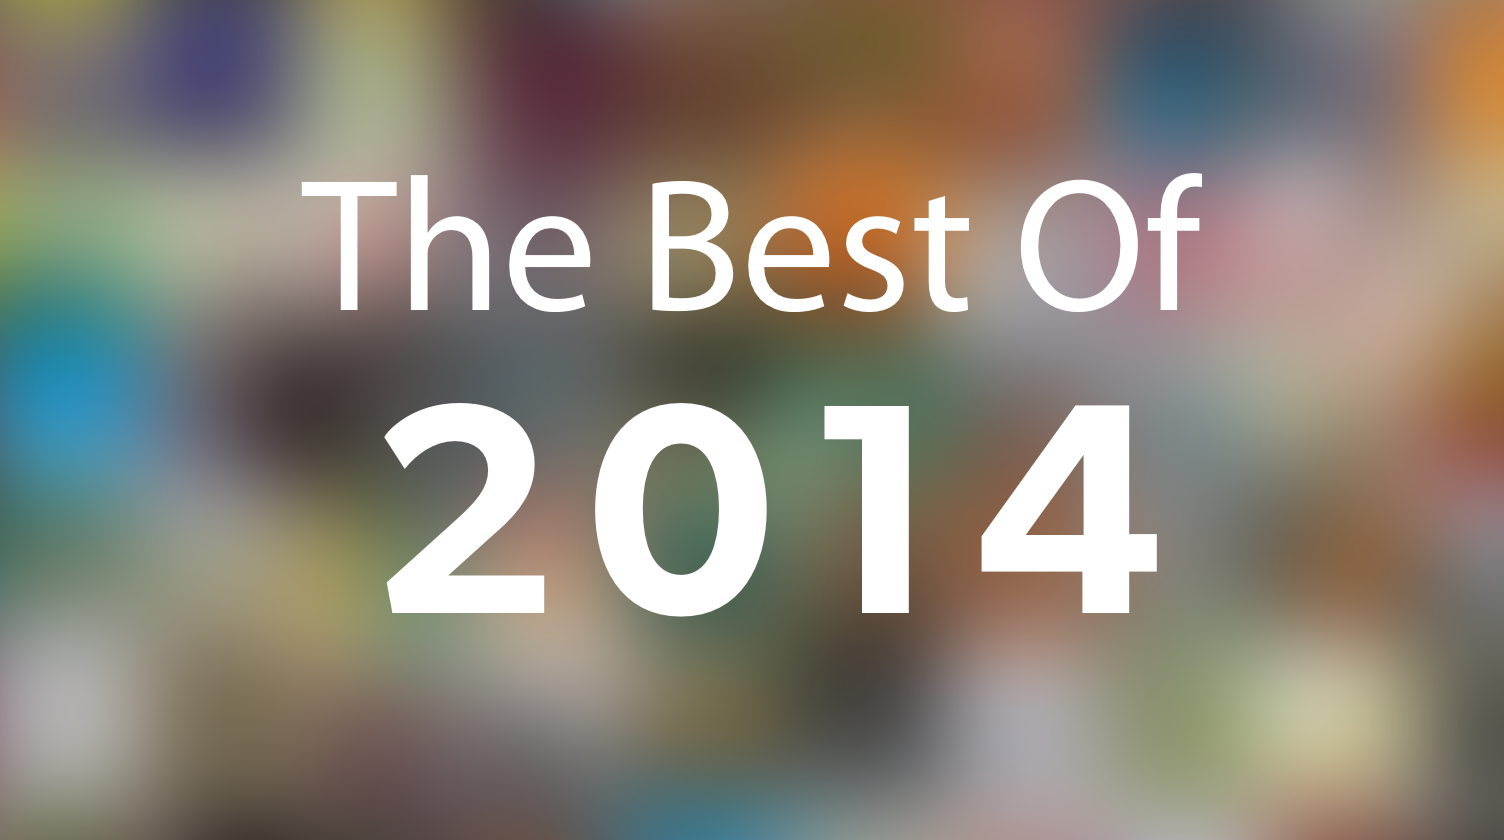 The Best of 2014